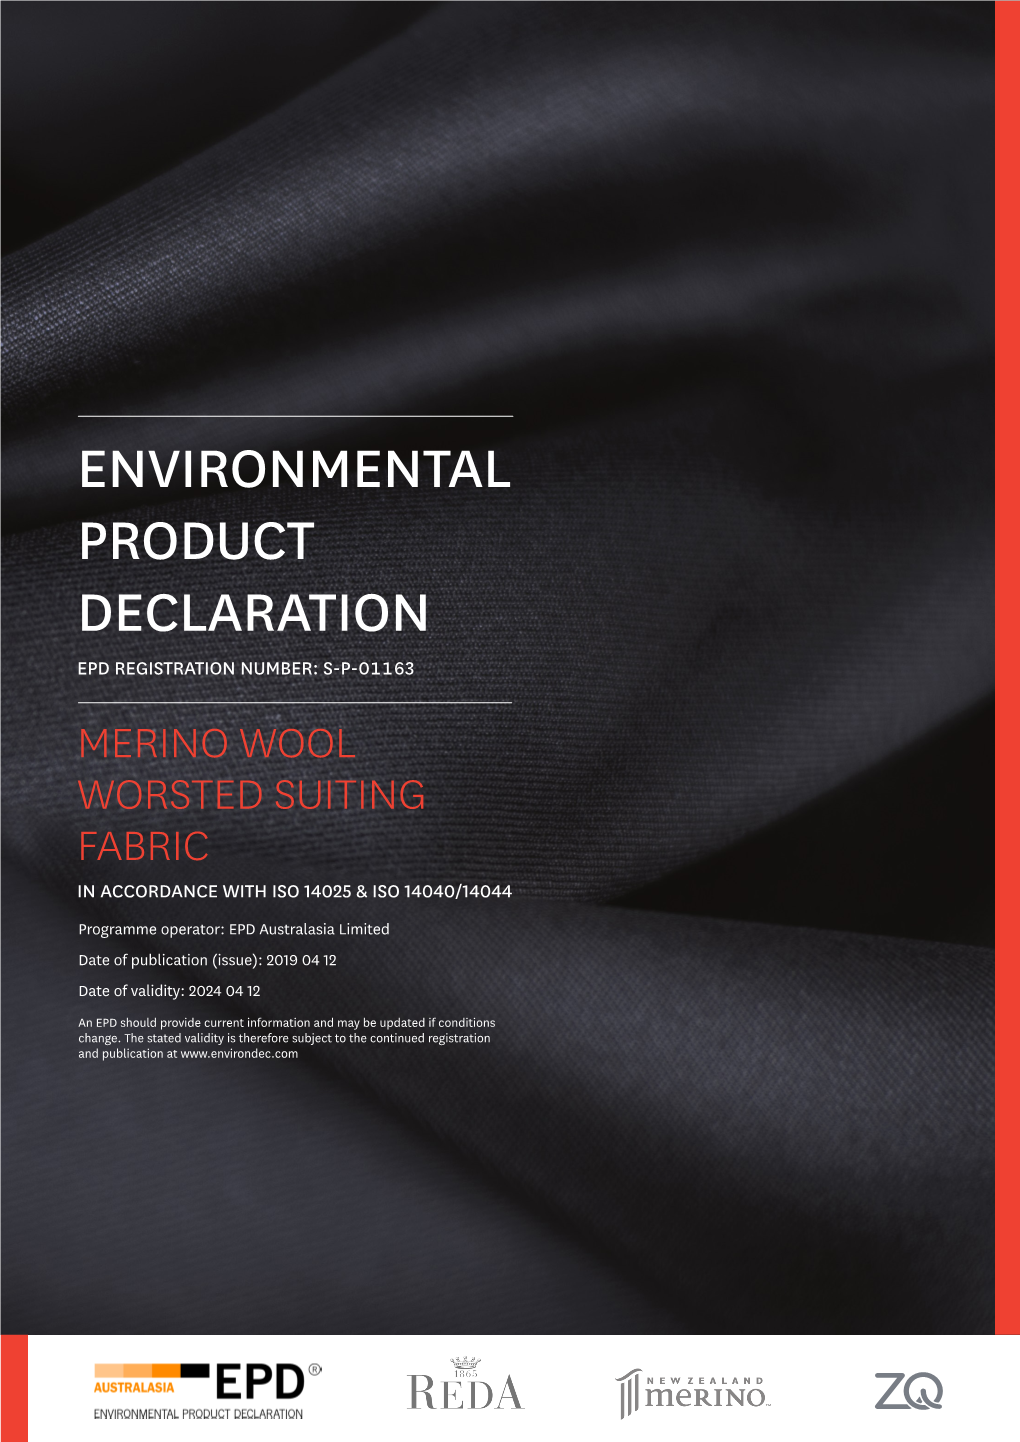 Environmental Product Declaration Epd Registration Number: S-P-01163 Merino Wool Worsted Suiting Fabric in Accordance with Iso 14025 & Iso 14040/14044